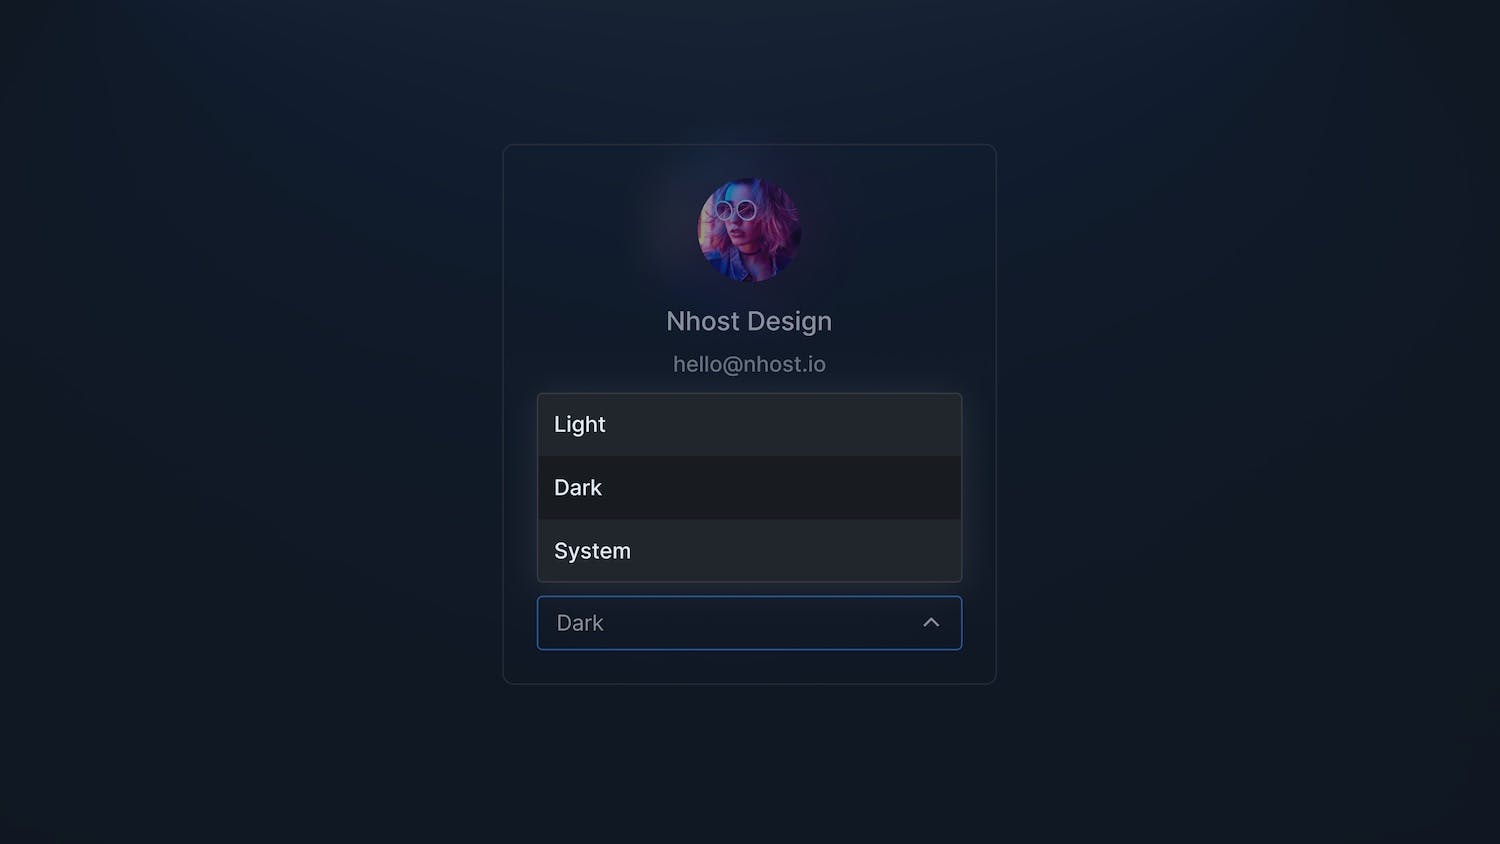 A theme selector with three options: Light, Dark, and System